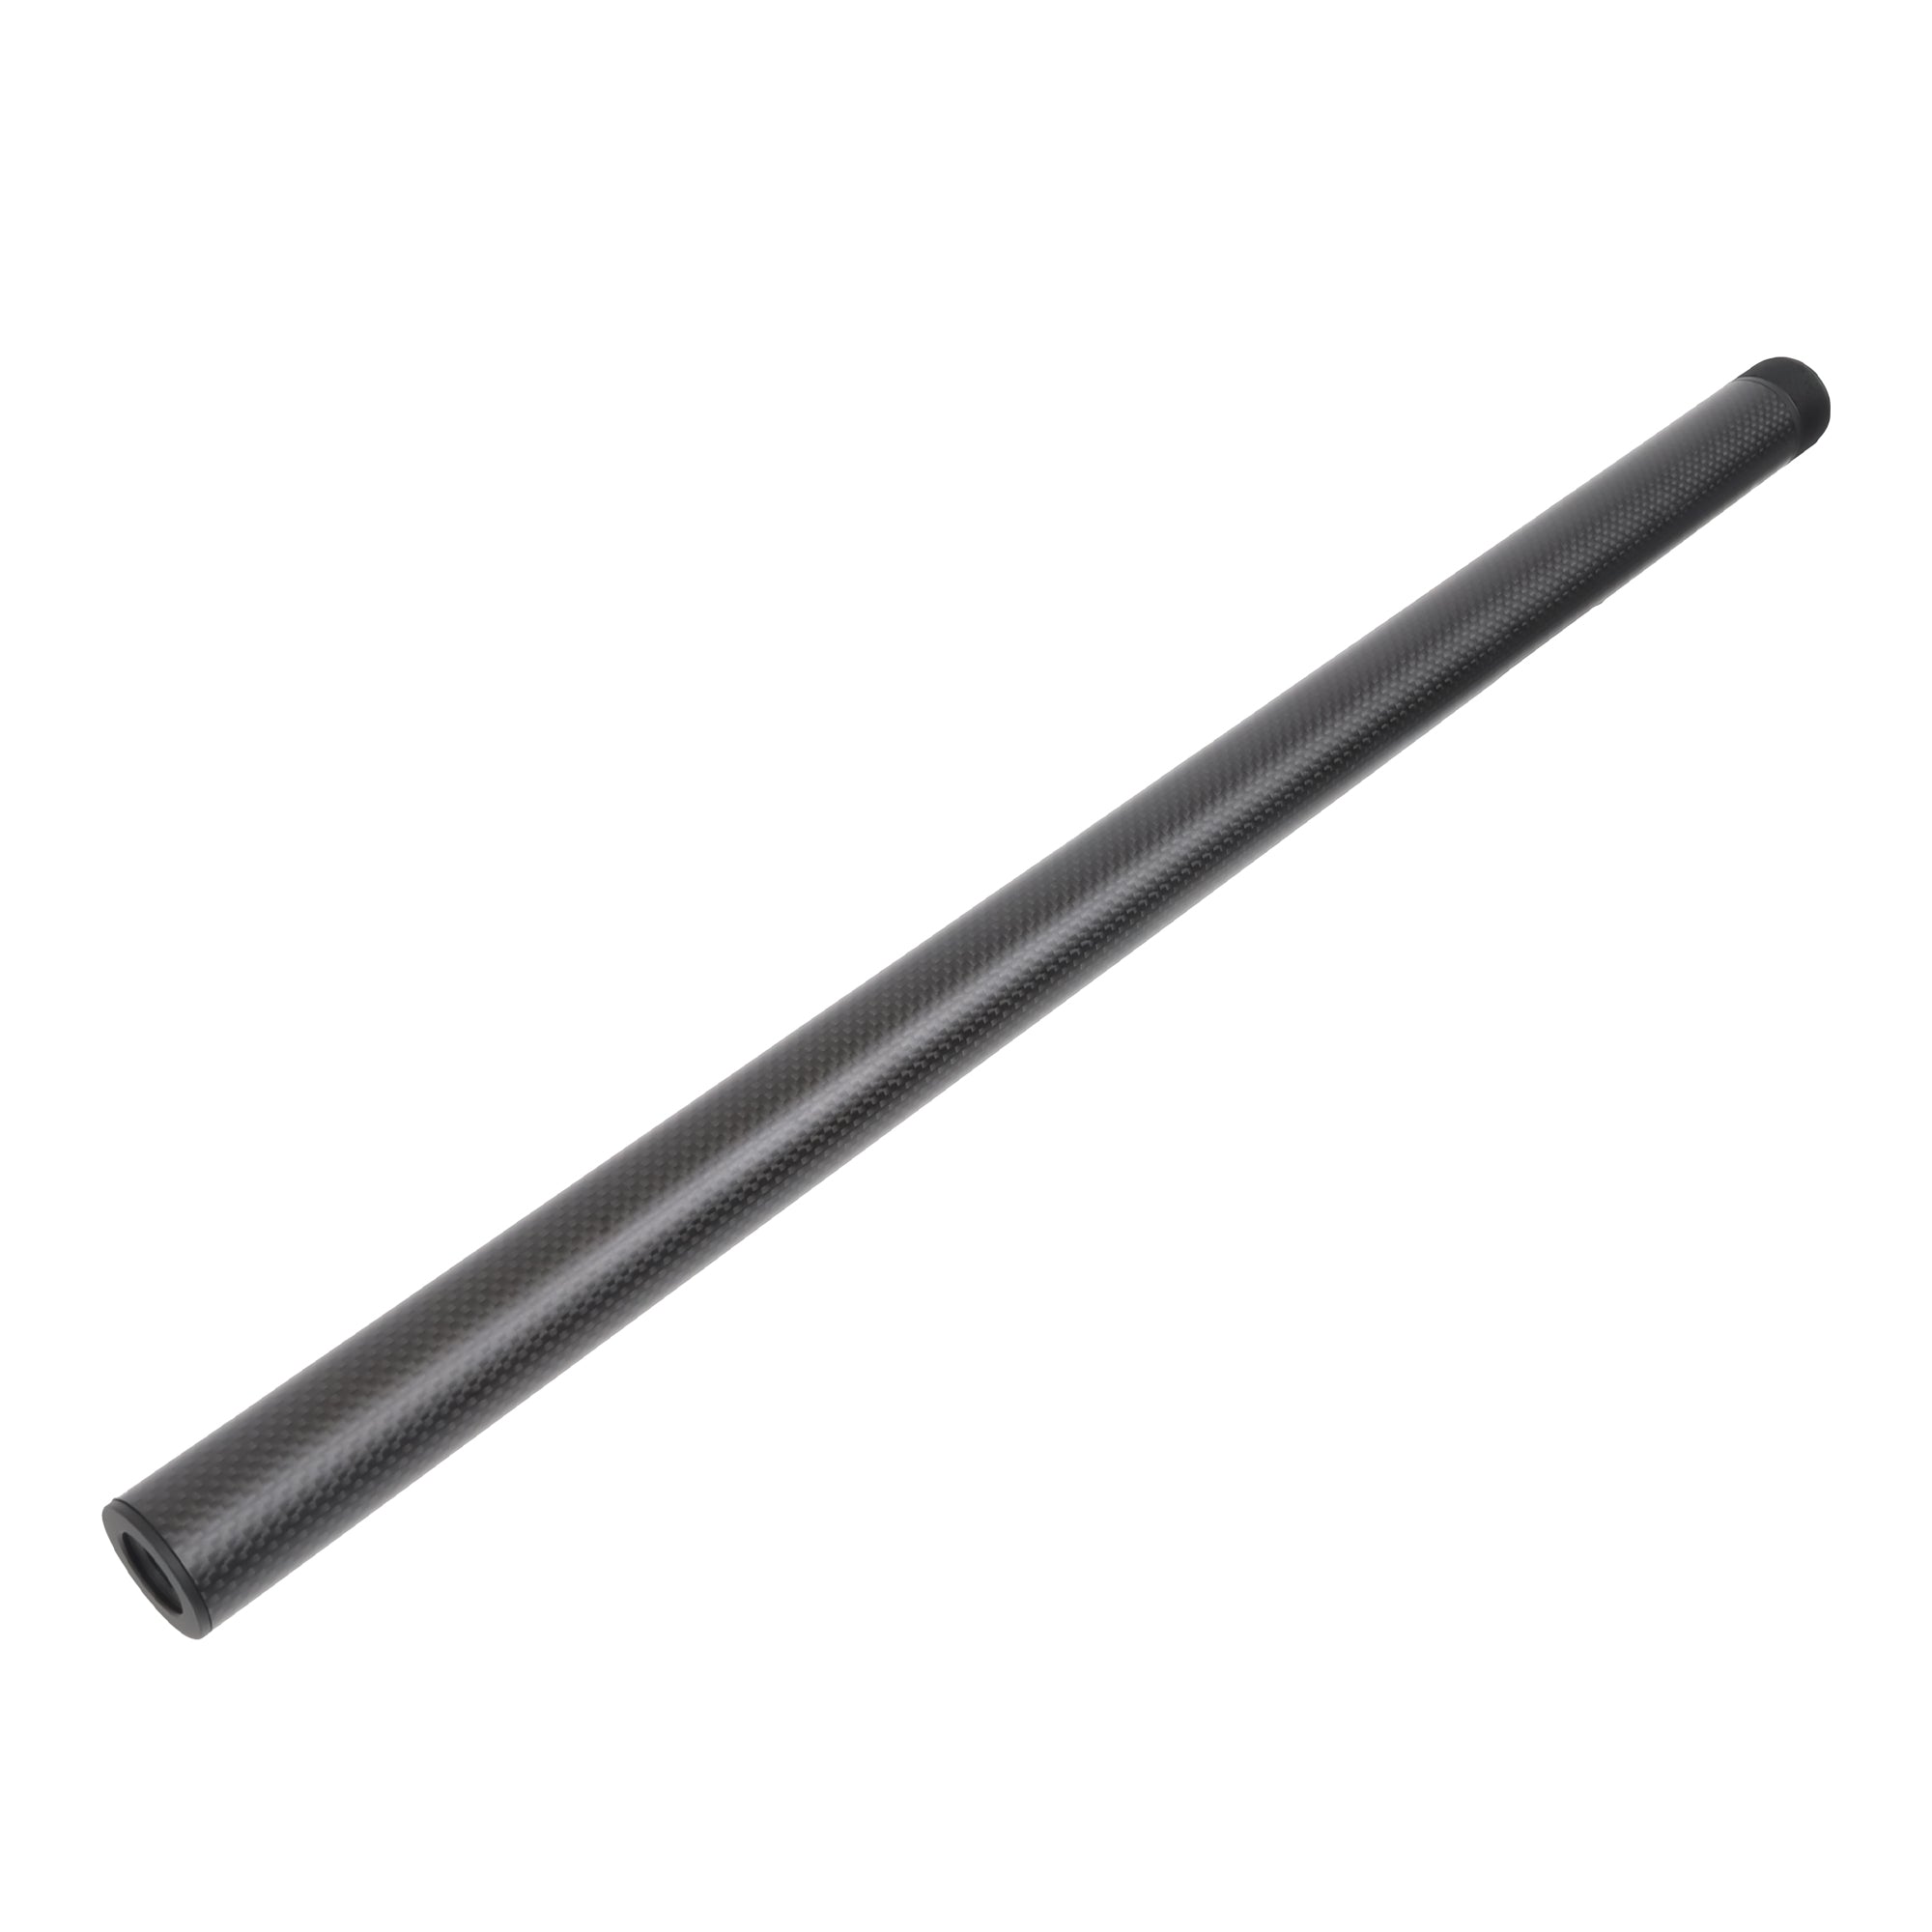 VSR-10 Carbon Outer Barrel [PSS] [Scheduled to be released in December! Now accepting reservations]